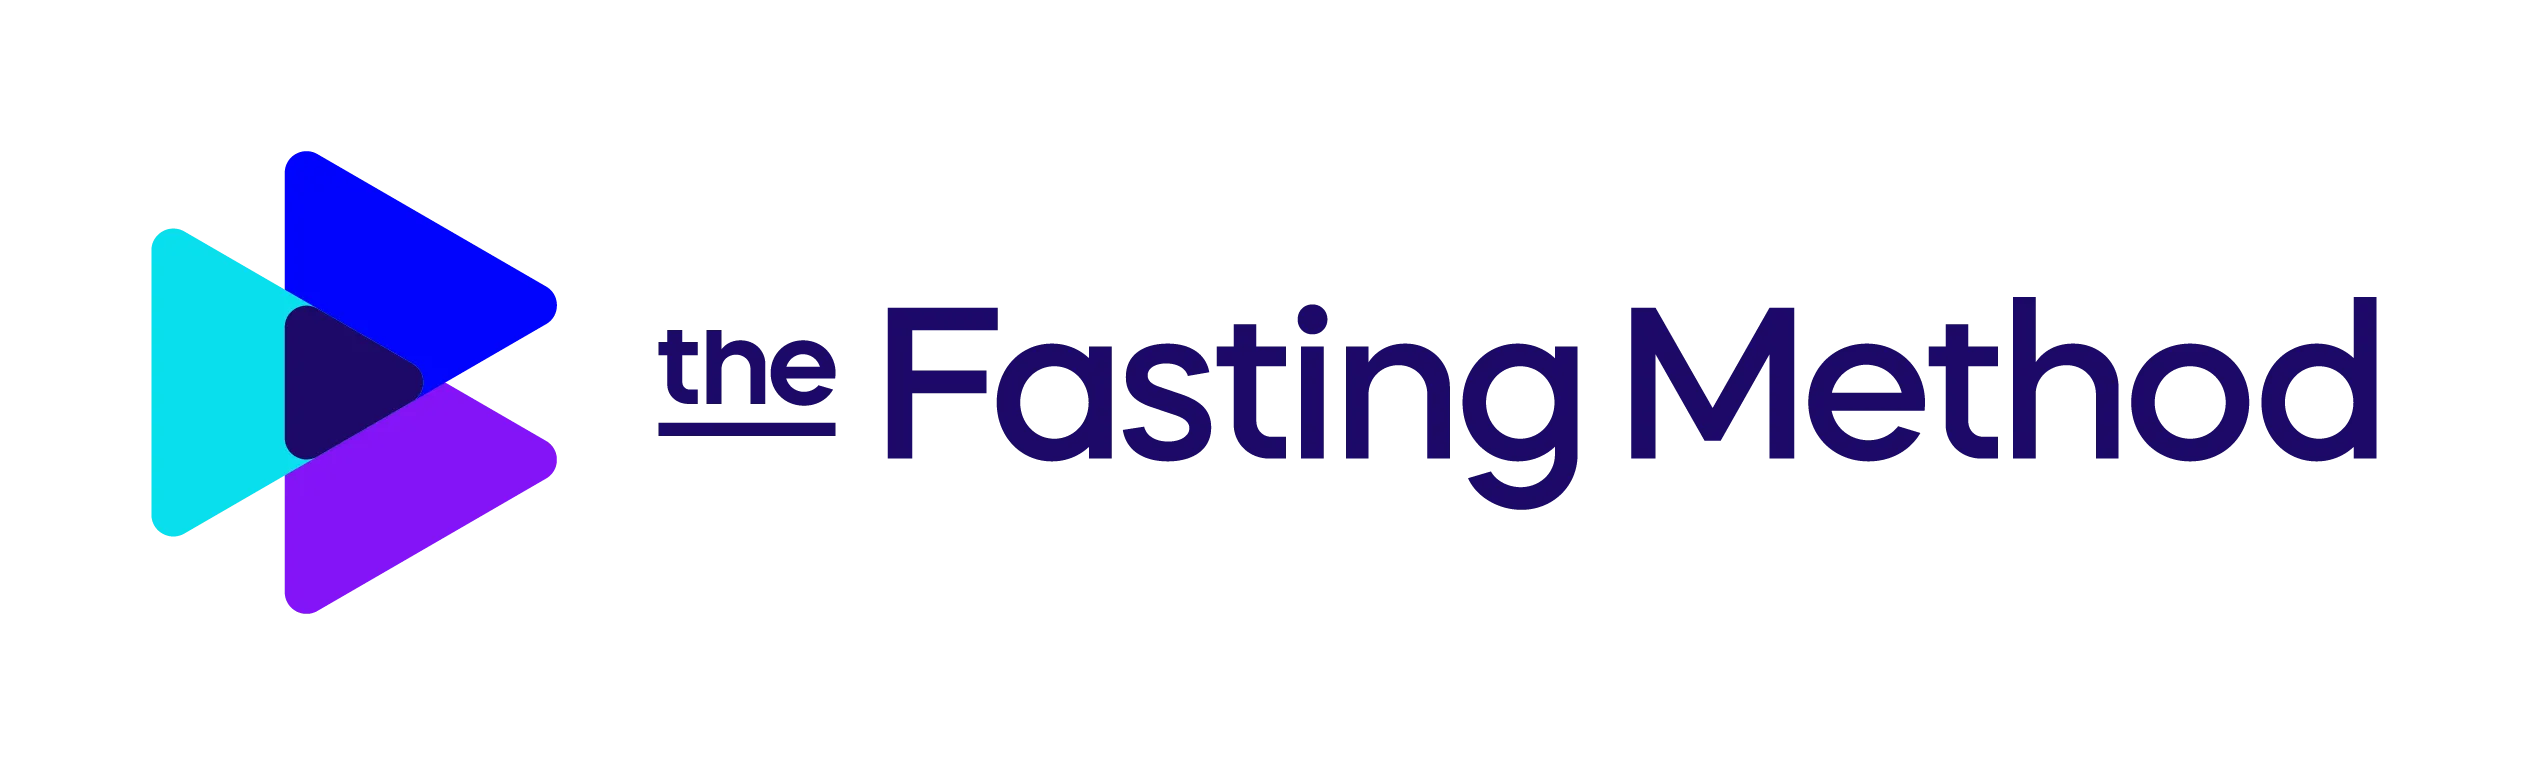 The Fasting Method